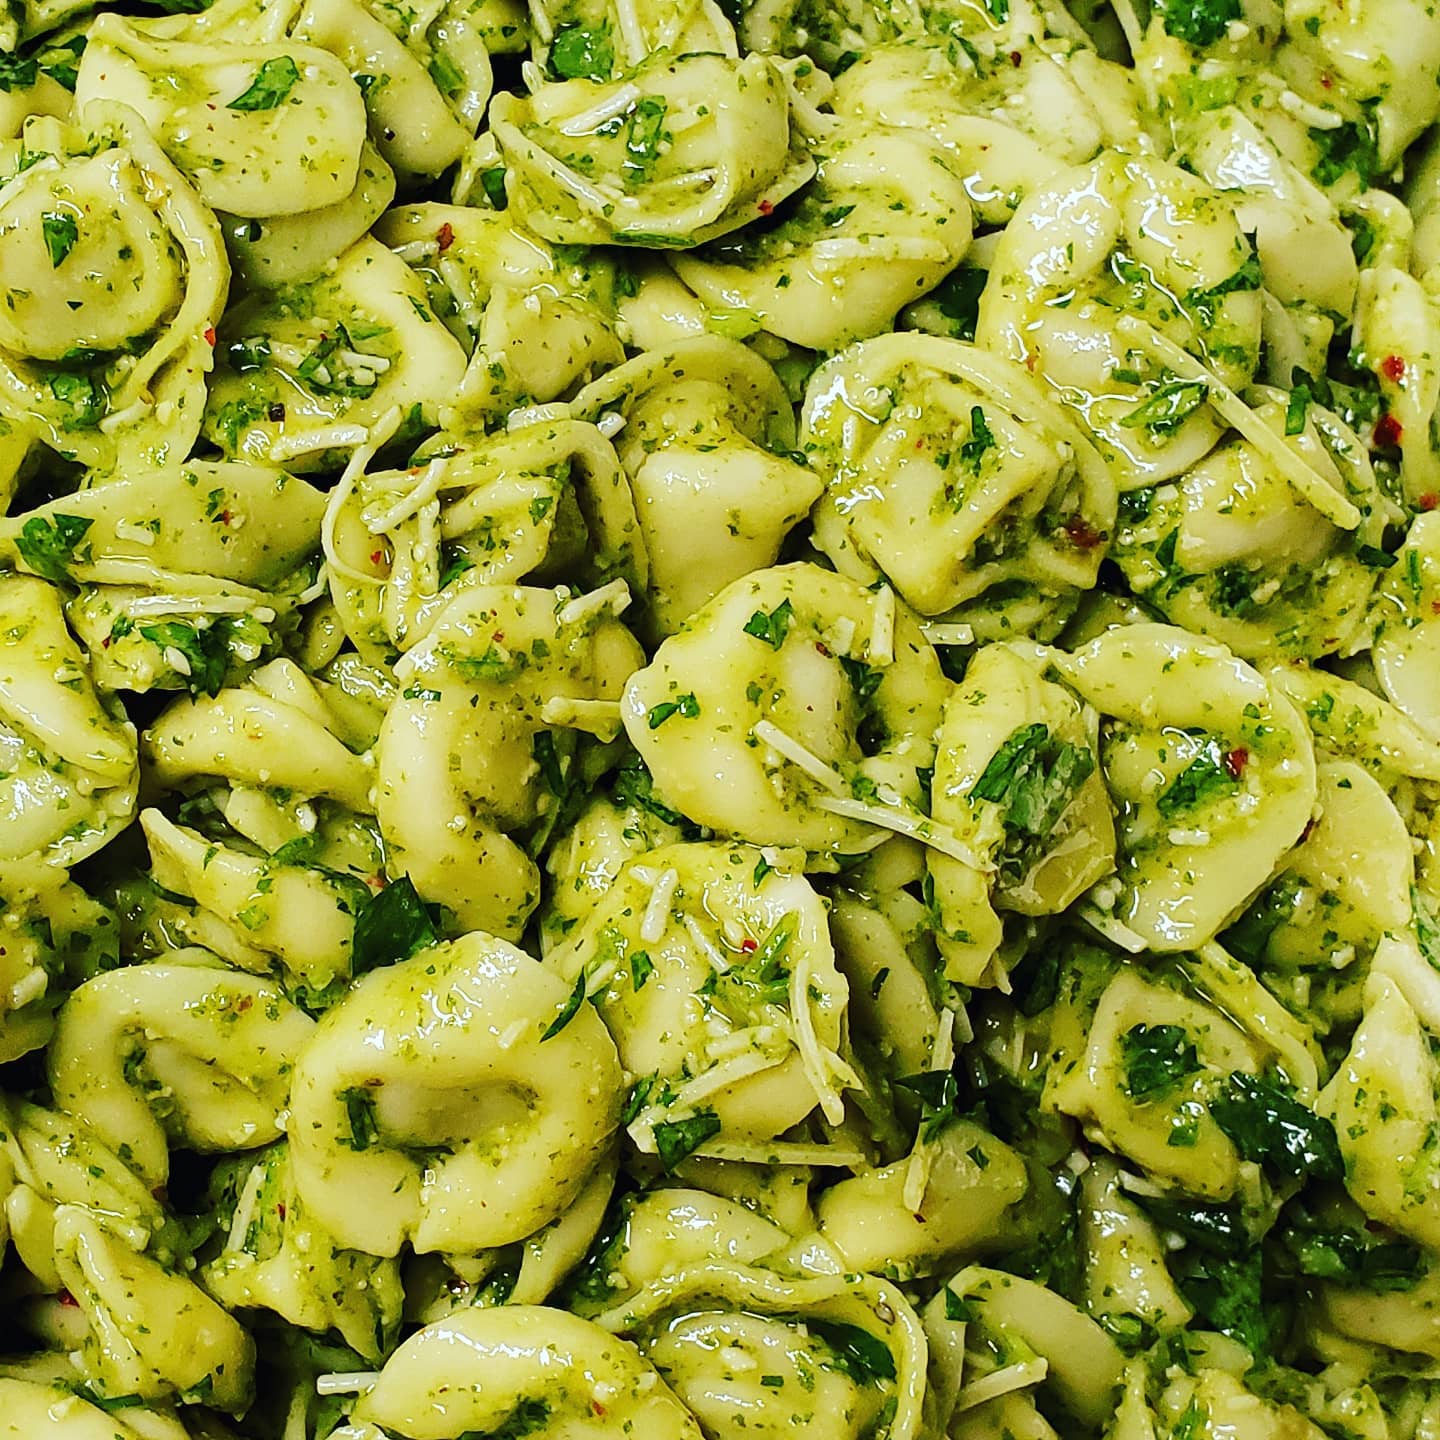 A close up of Baldarottaâ€™s Arugula Pesto Tortellini Salad fills the screen. The tortellini are evenly coated in the pesto, which features visible pieces of Arugula throughout. It is sprinkled with shredded parmesan cheese. Photo by Jordan Baldarotta.